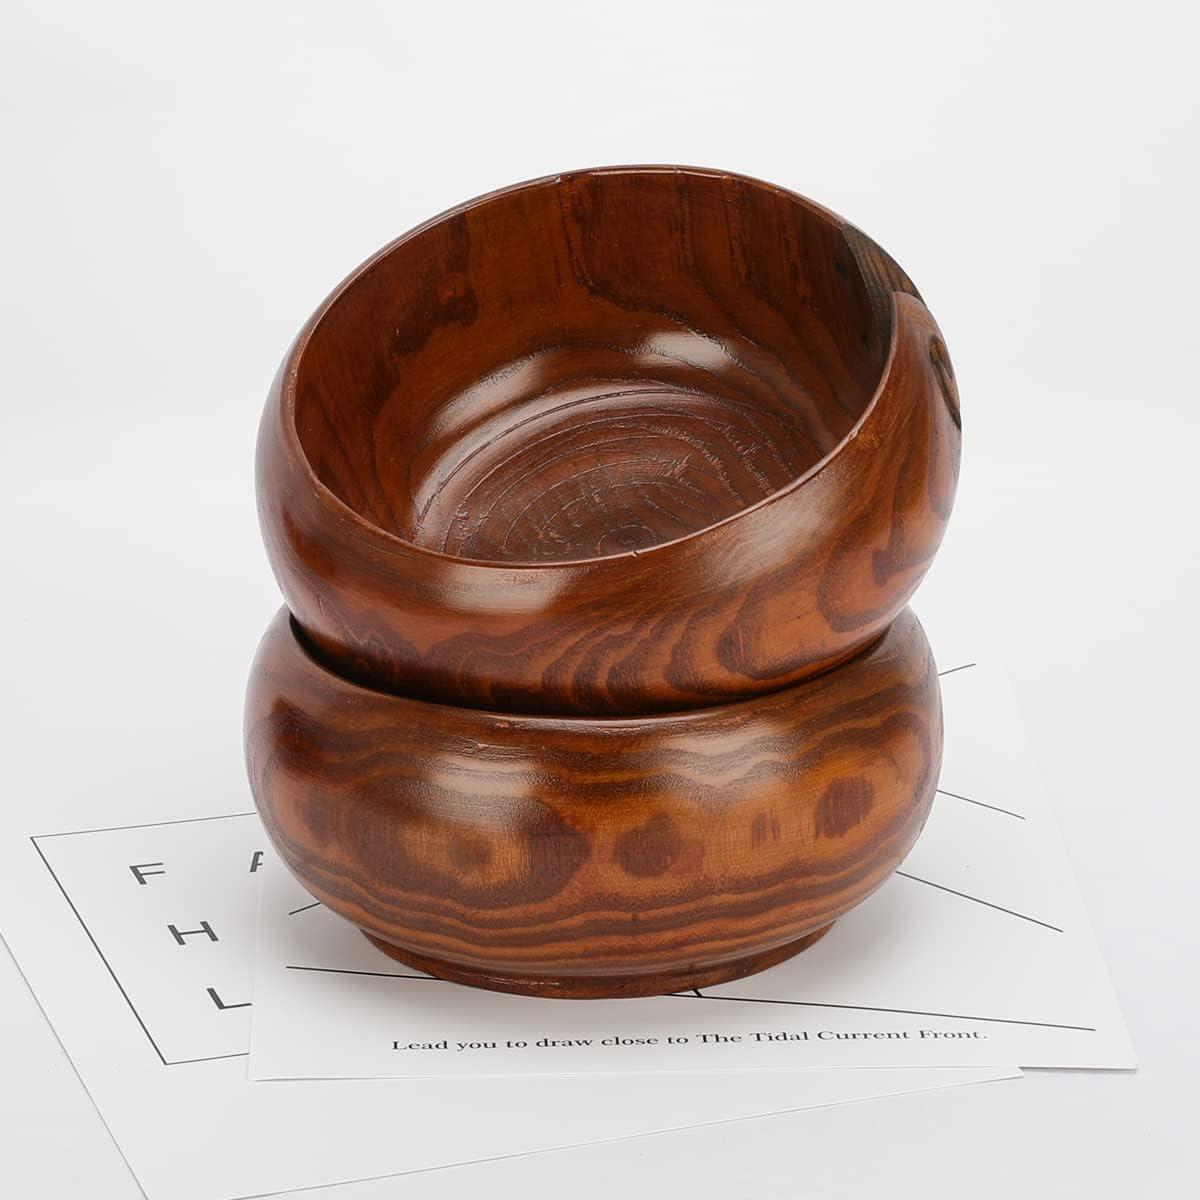 ZX Vision Wooden Yarn Bowl with Holes Holder Rosewood Handmade Craft Knitting Bowl Storage Knitting and Crocheting Accessories Kit Organizer, Perfect